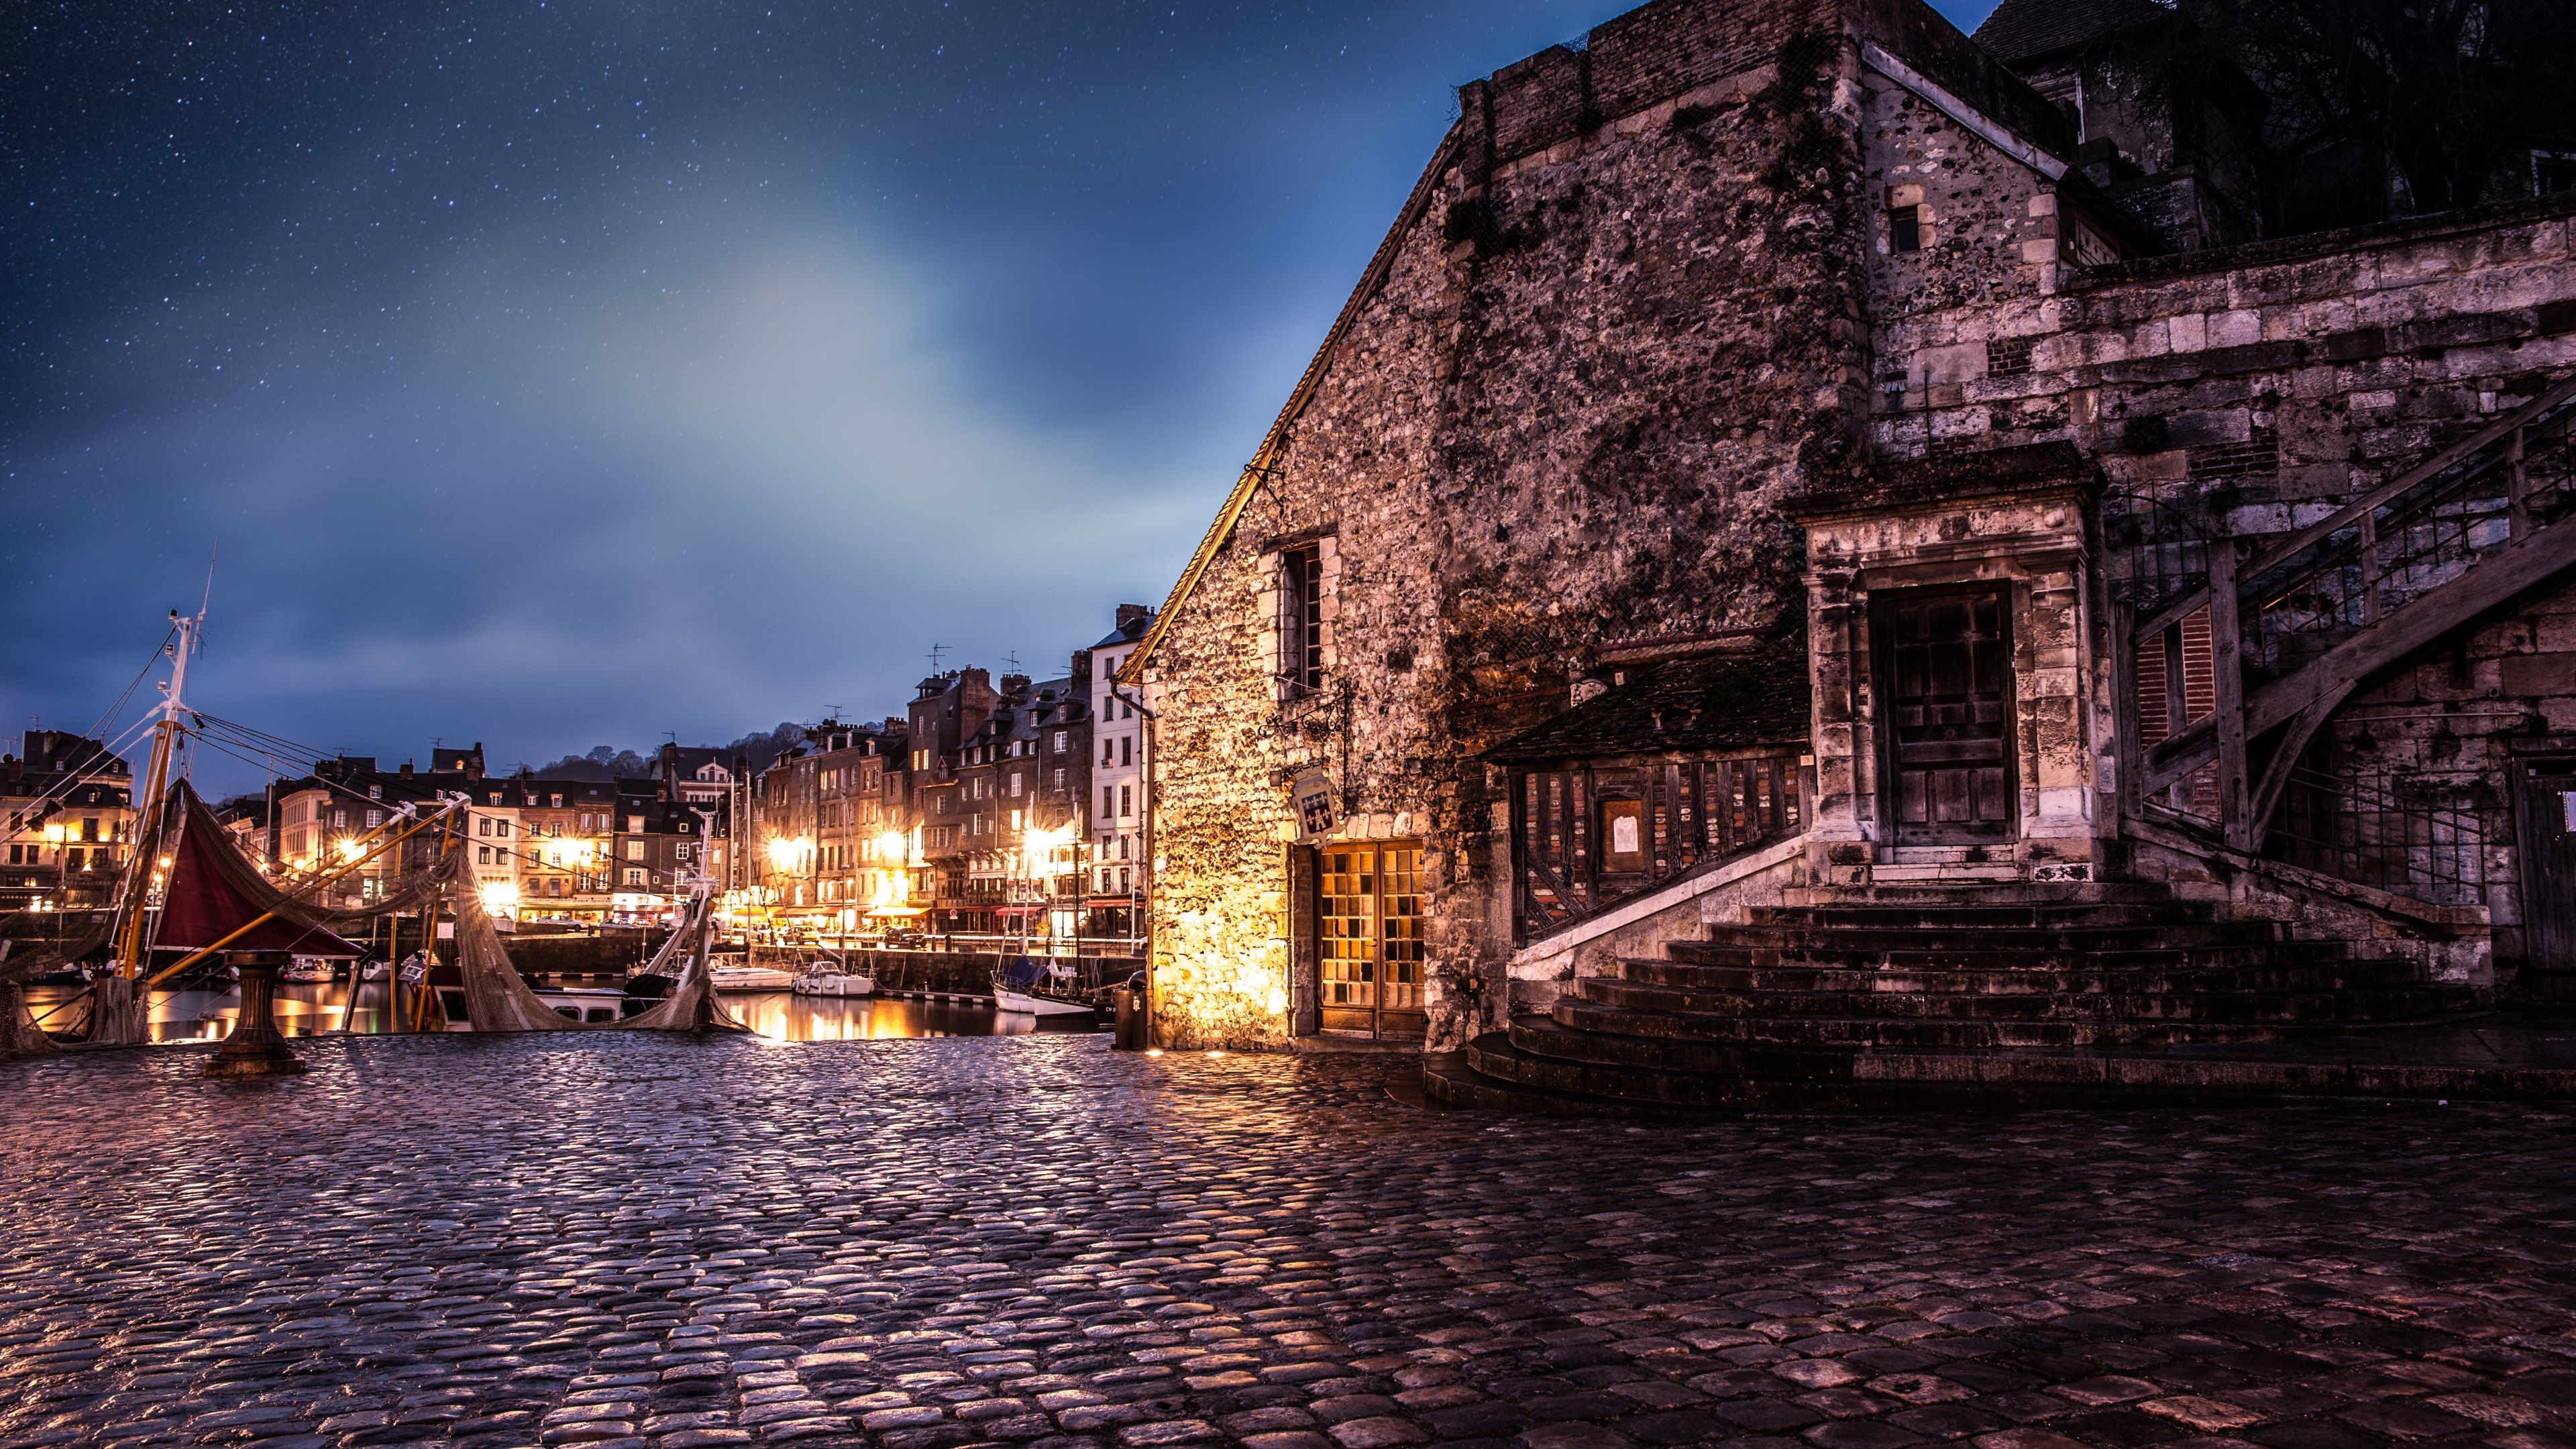 City Architecture Medieval Honfleur ultra hd wallpapers - Ultra ...